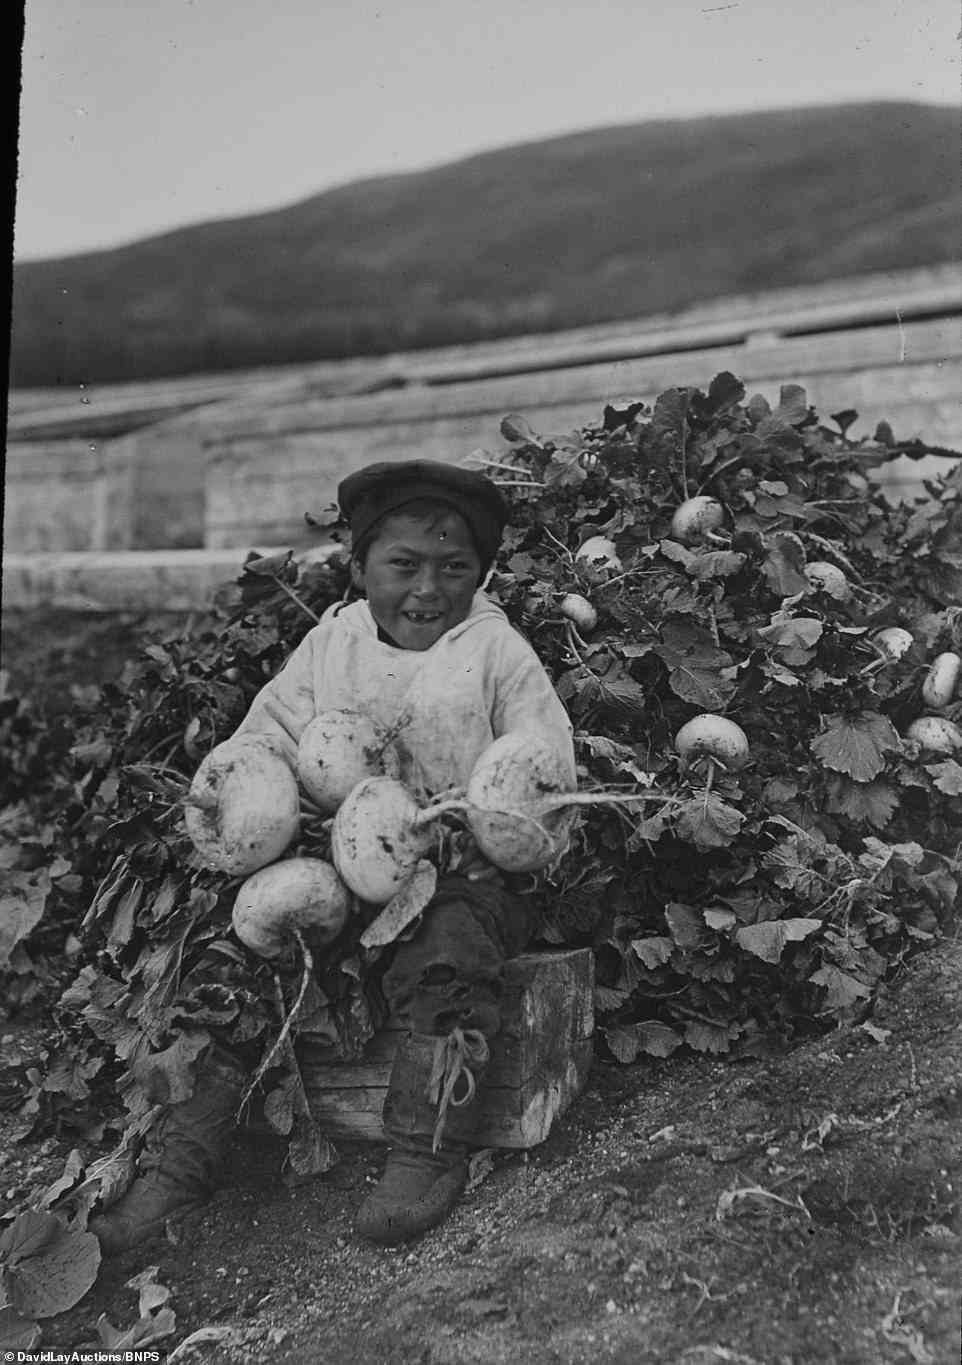 An Inuit child with vegetables smiles broadly going about their daily lives during the 19th century before the Spanish Flu killed one third of the population